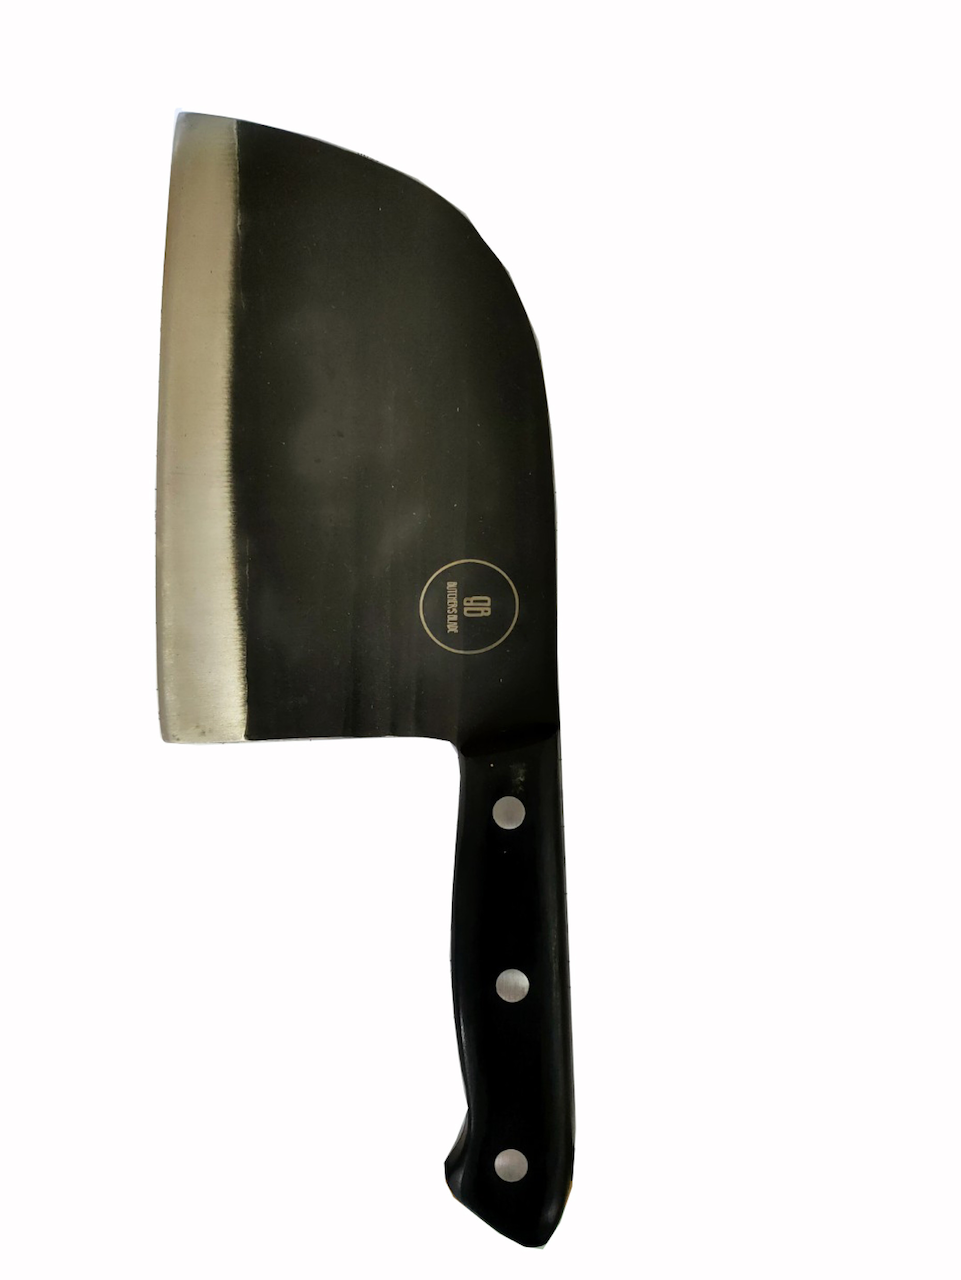 This Serbian High Carbon Butcher's style cleaver is big and solid knife that can chop or cut just about anything you can thow at it. It is heavy and makes cutting almost anything feel like slicing thru butter. Crooked Butcher projama cooling